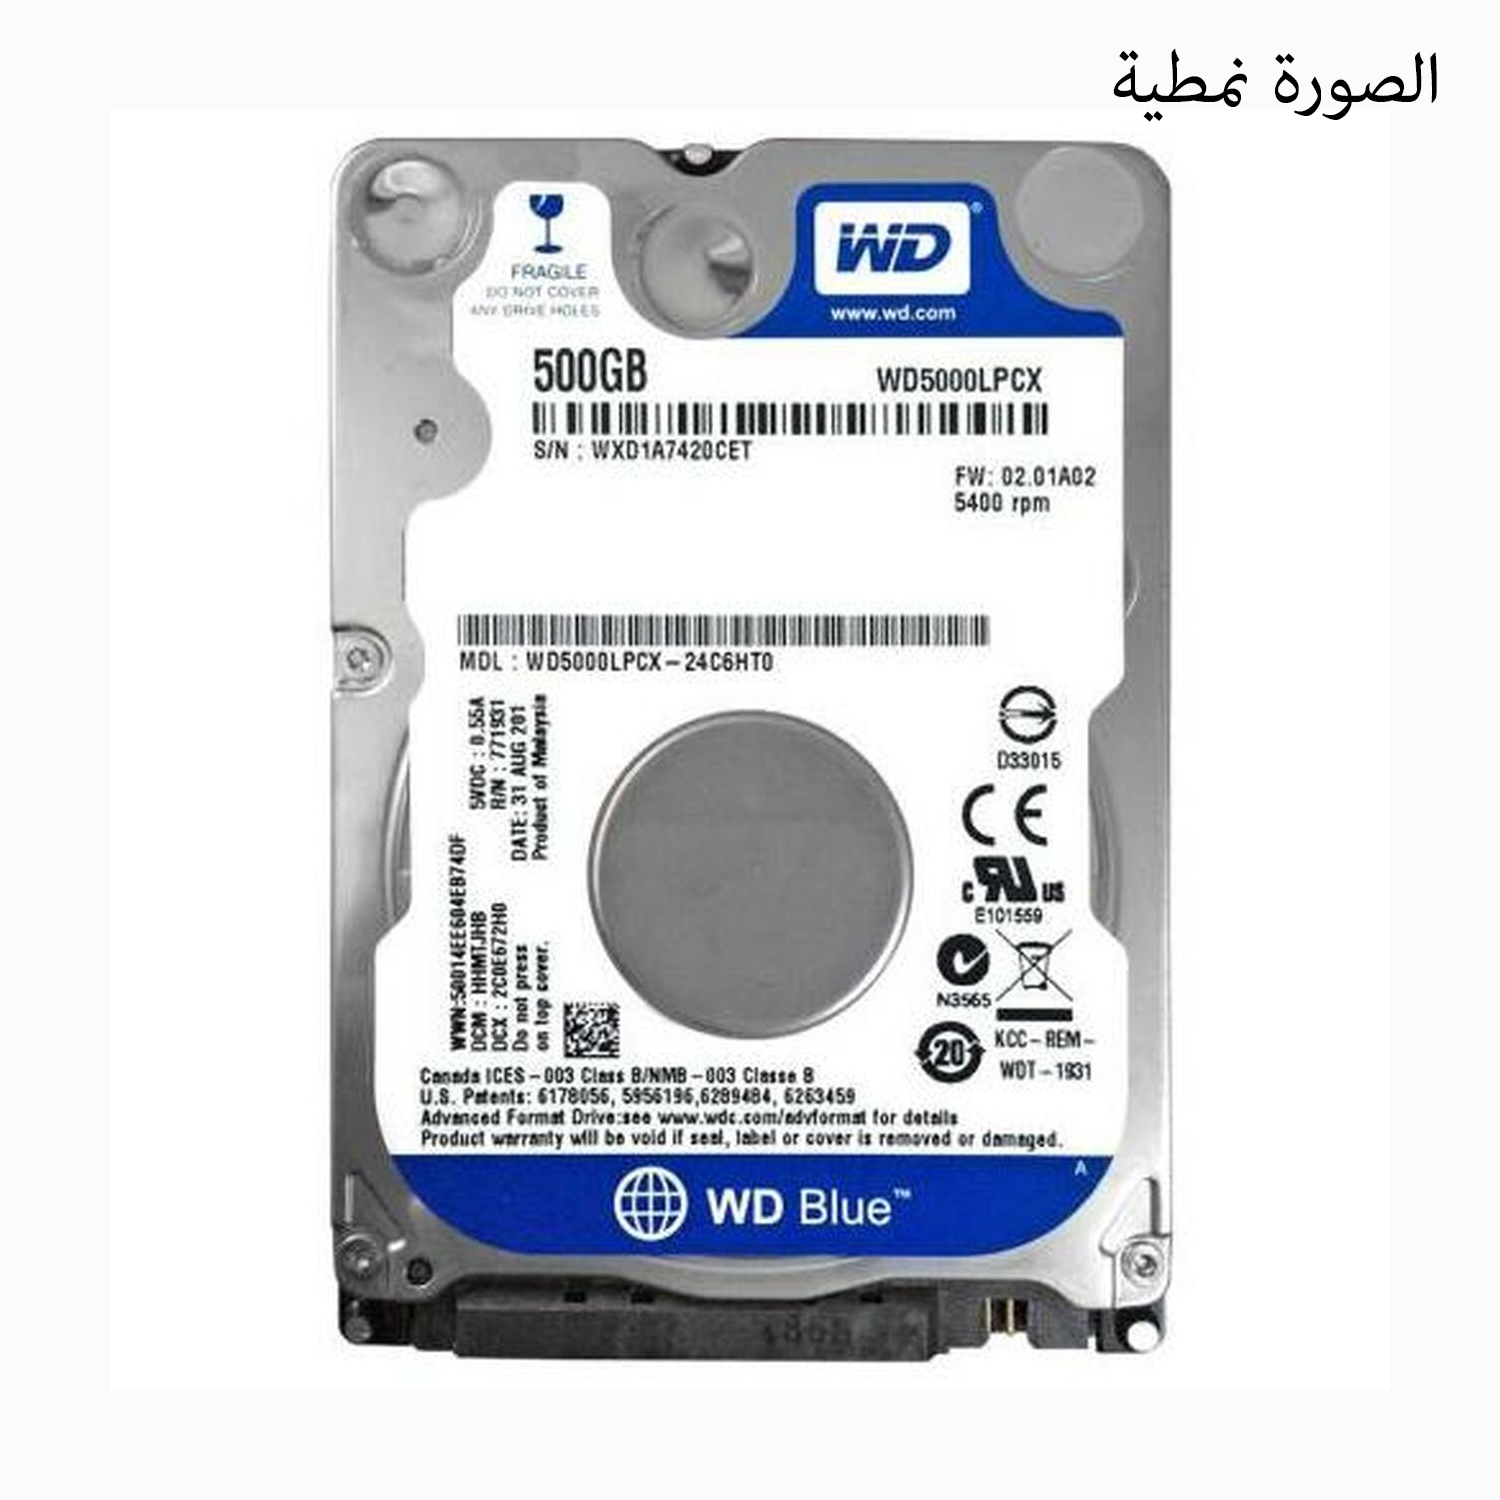 HDD 500GB WD SATA3 FOR NOTEBOOK 5400RPM مستعمل, Laptop HDD